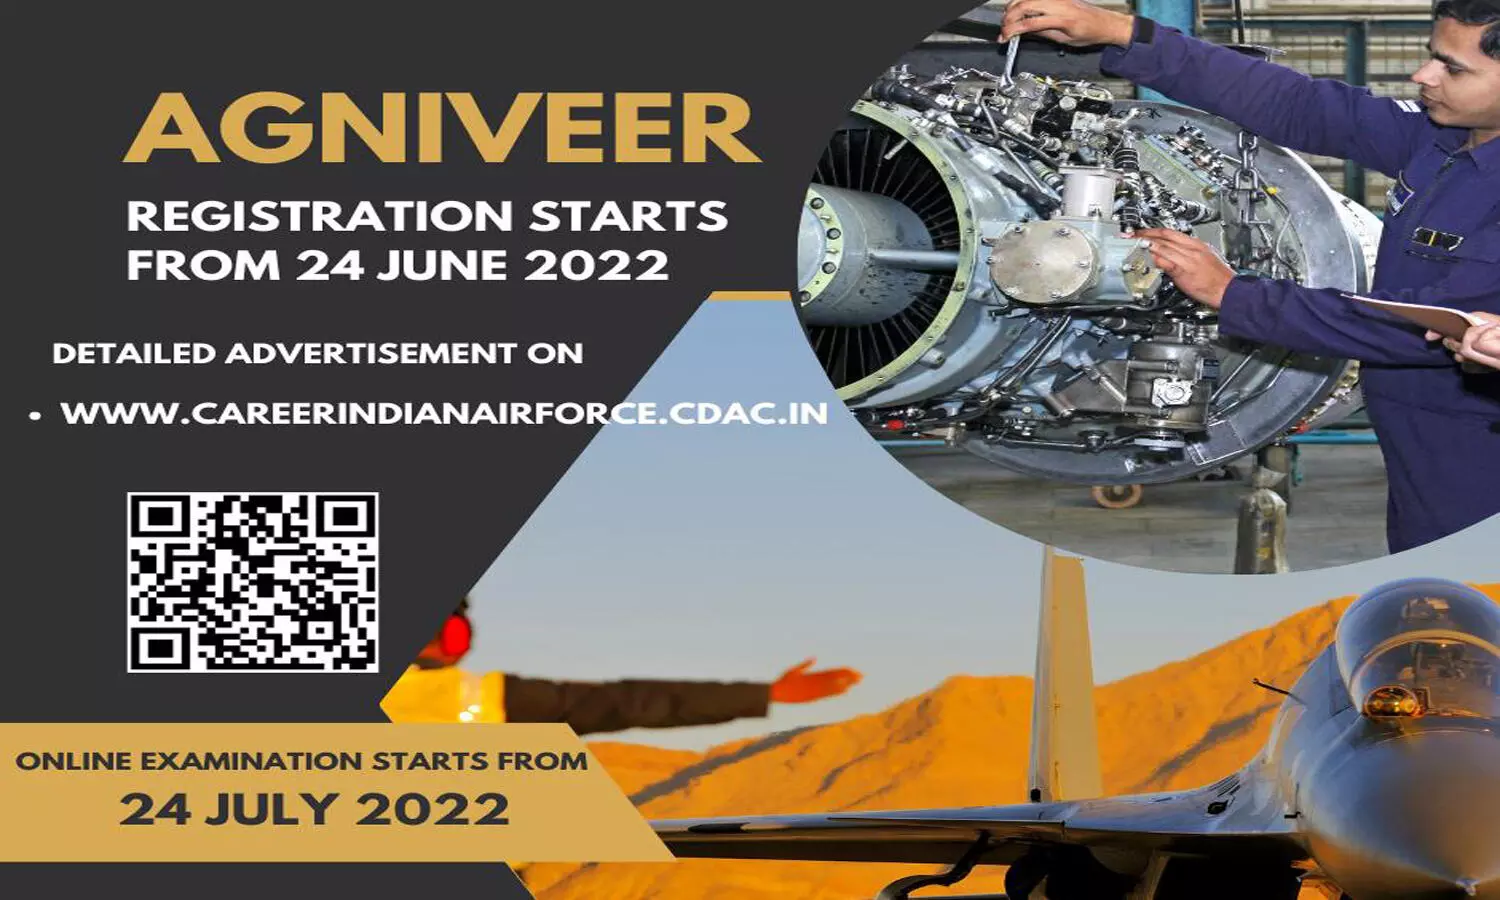 Agneepath Recruitment 2022: Registration for Indian Air Force to begin from June 24, details here